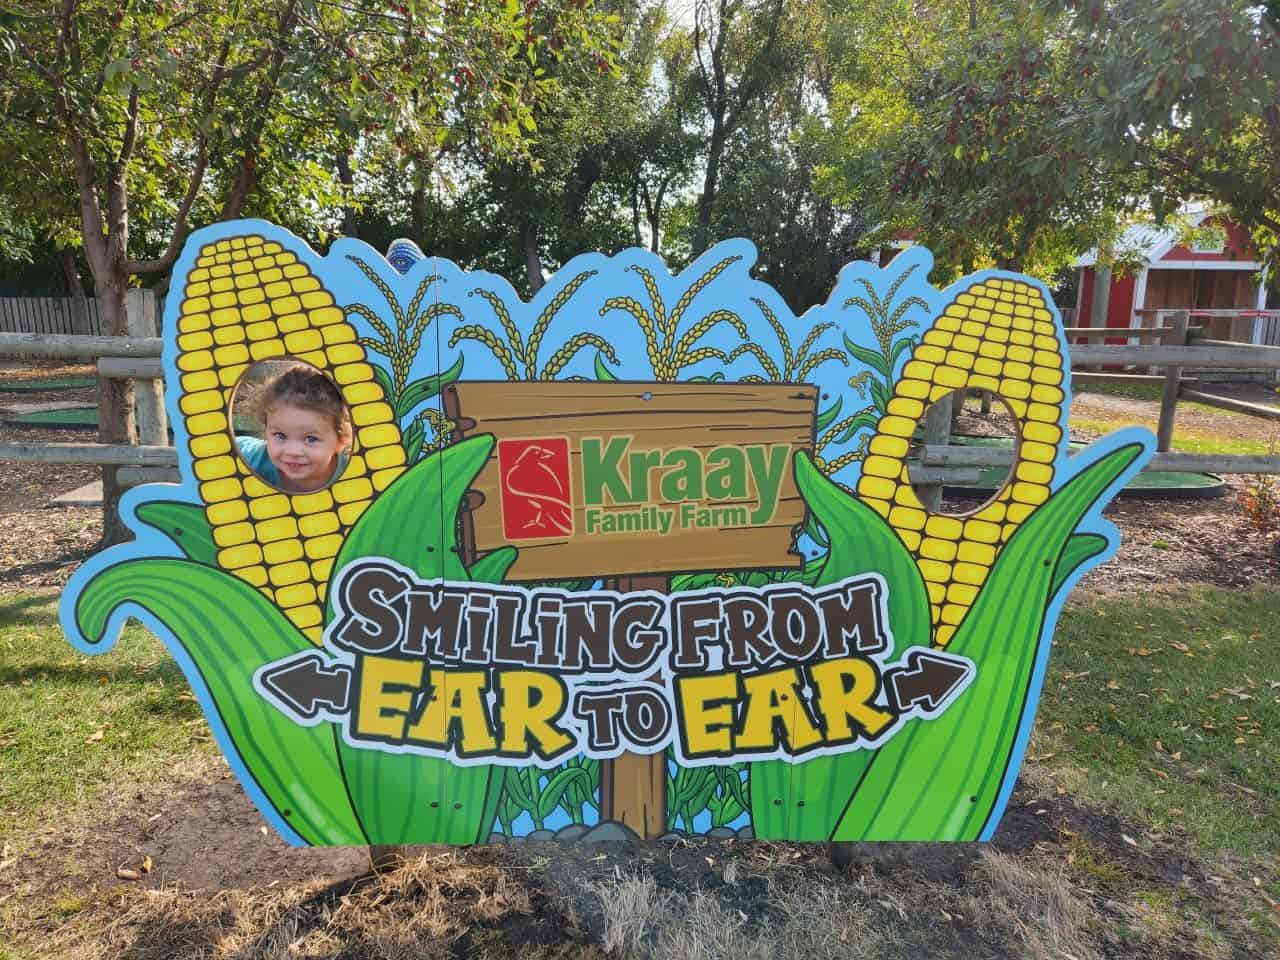 Kraay Family Farm has something for all ages to enjoy near Lacombe Alberta Canada. A fantastic family friendly attraction in Alberta.